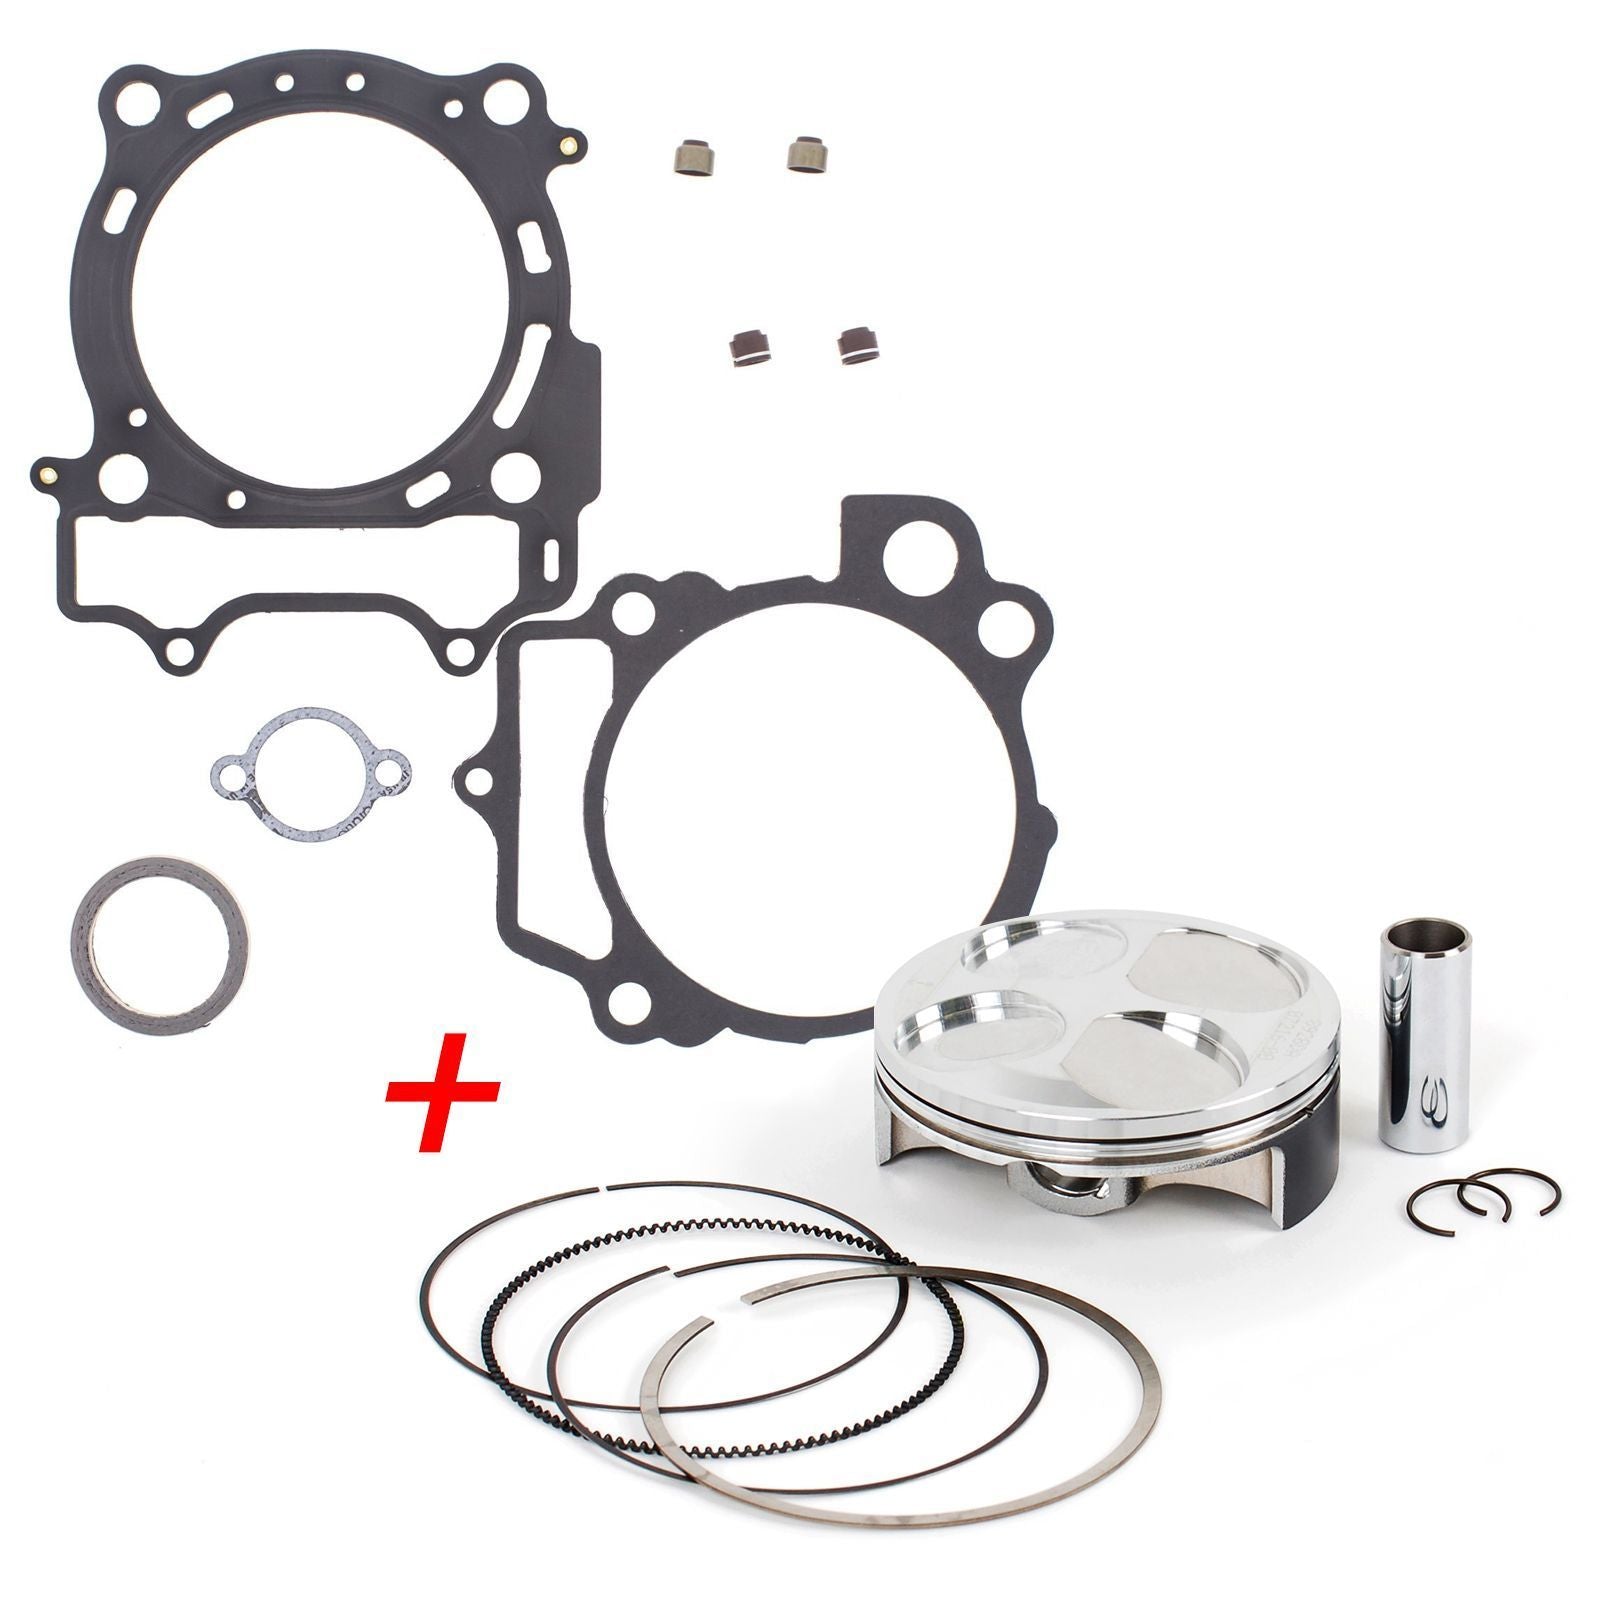 New Top End Rebuild Kit (B PRO) For Yamaha WR250F 2015-2019 #ERTY031BP